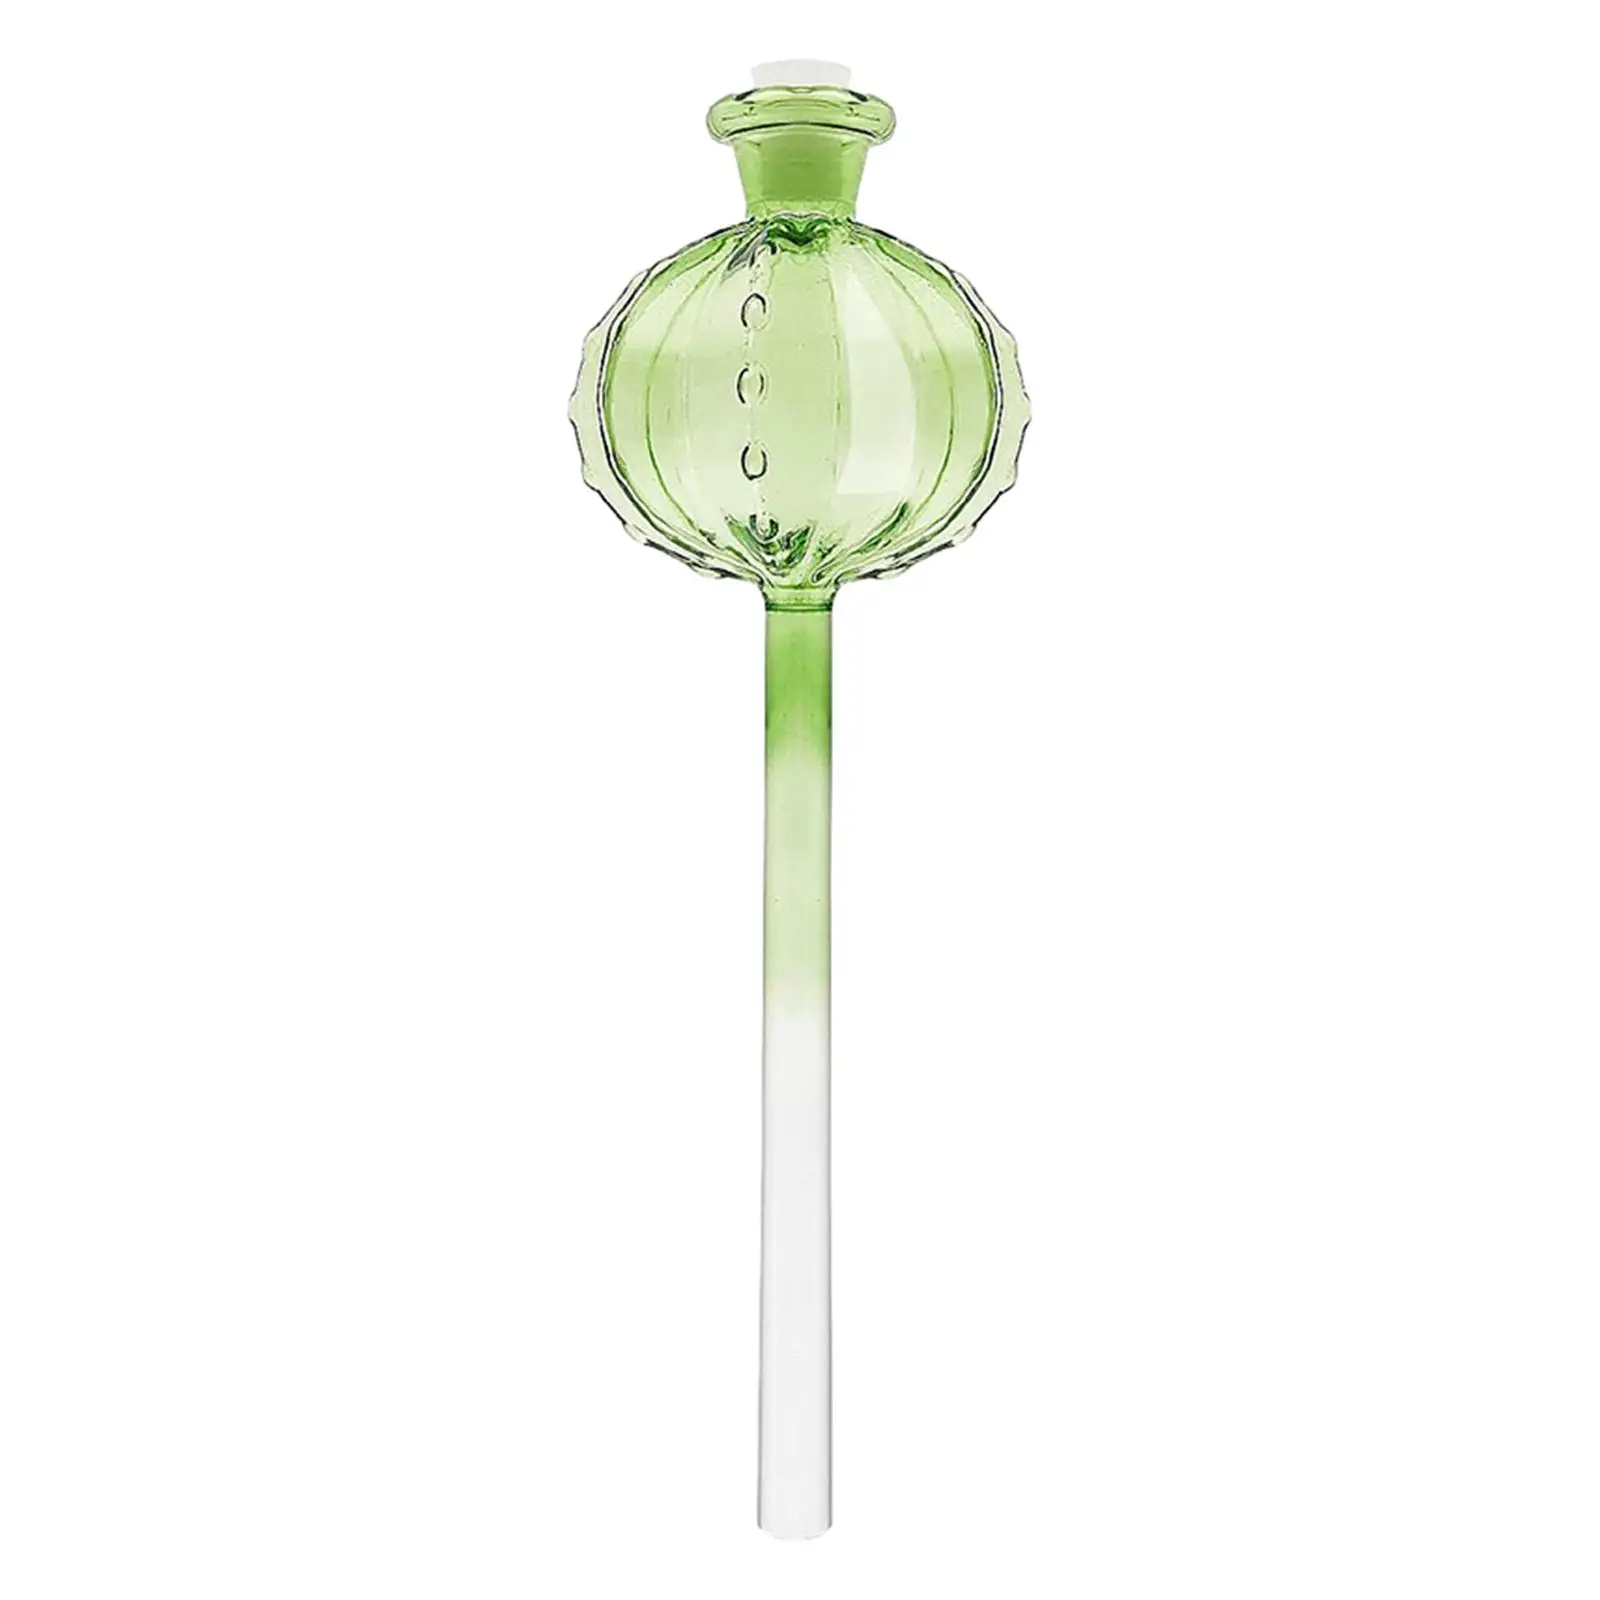 Plant Watering Globes Self Watering Planter Insert Glass Plant Watering Devices Automatic Watering Globes for Plants Gardening